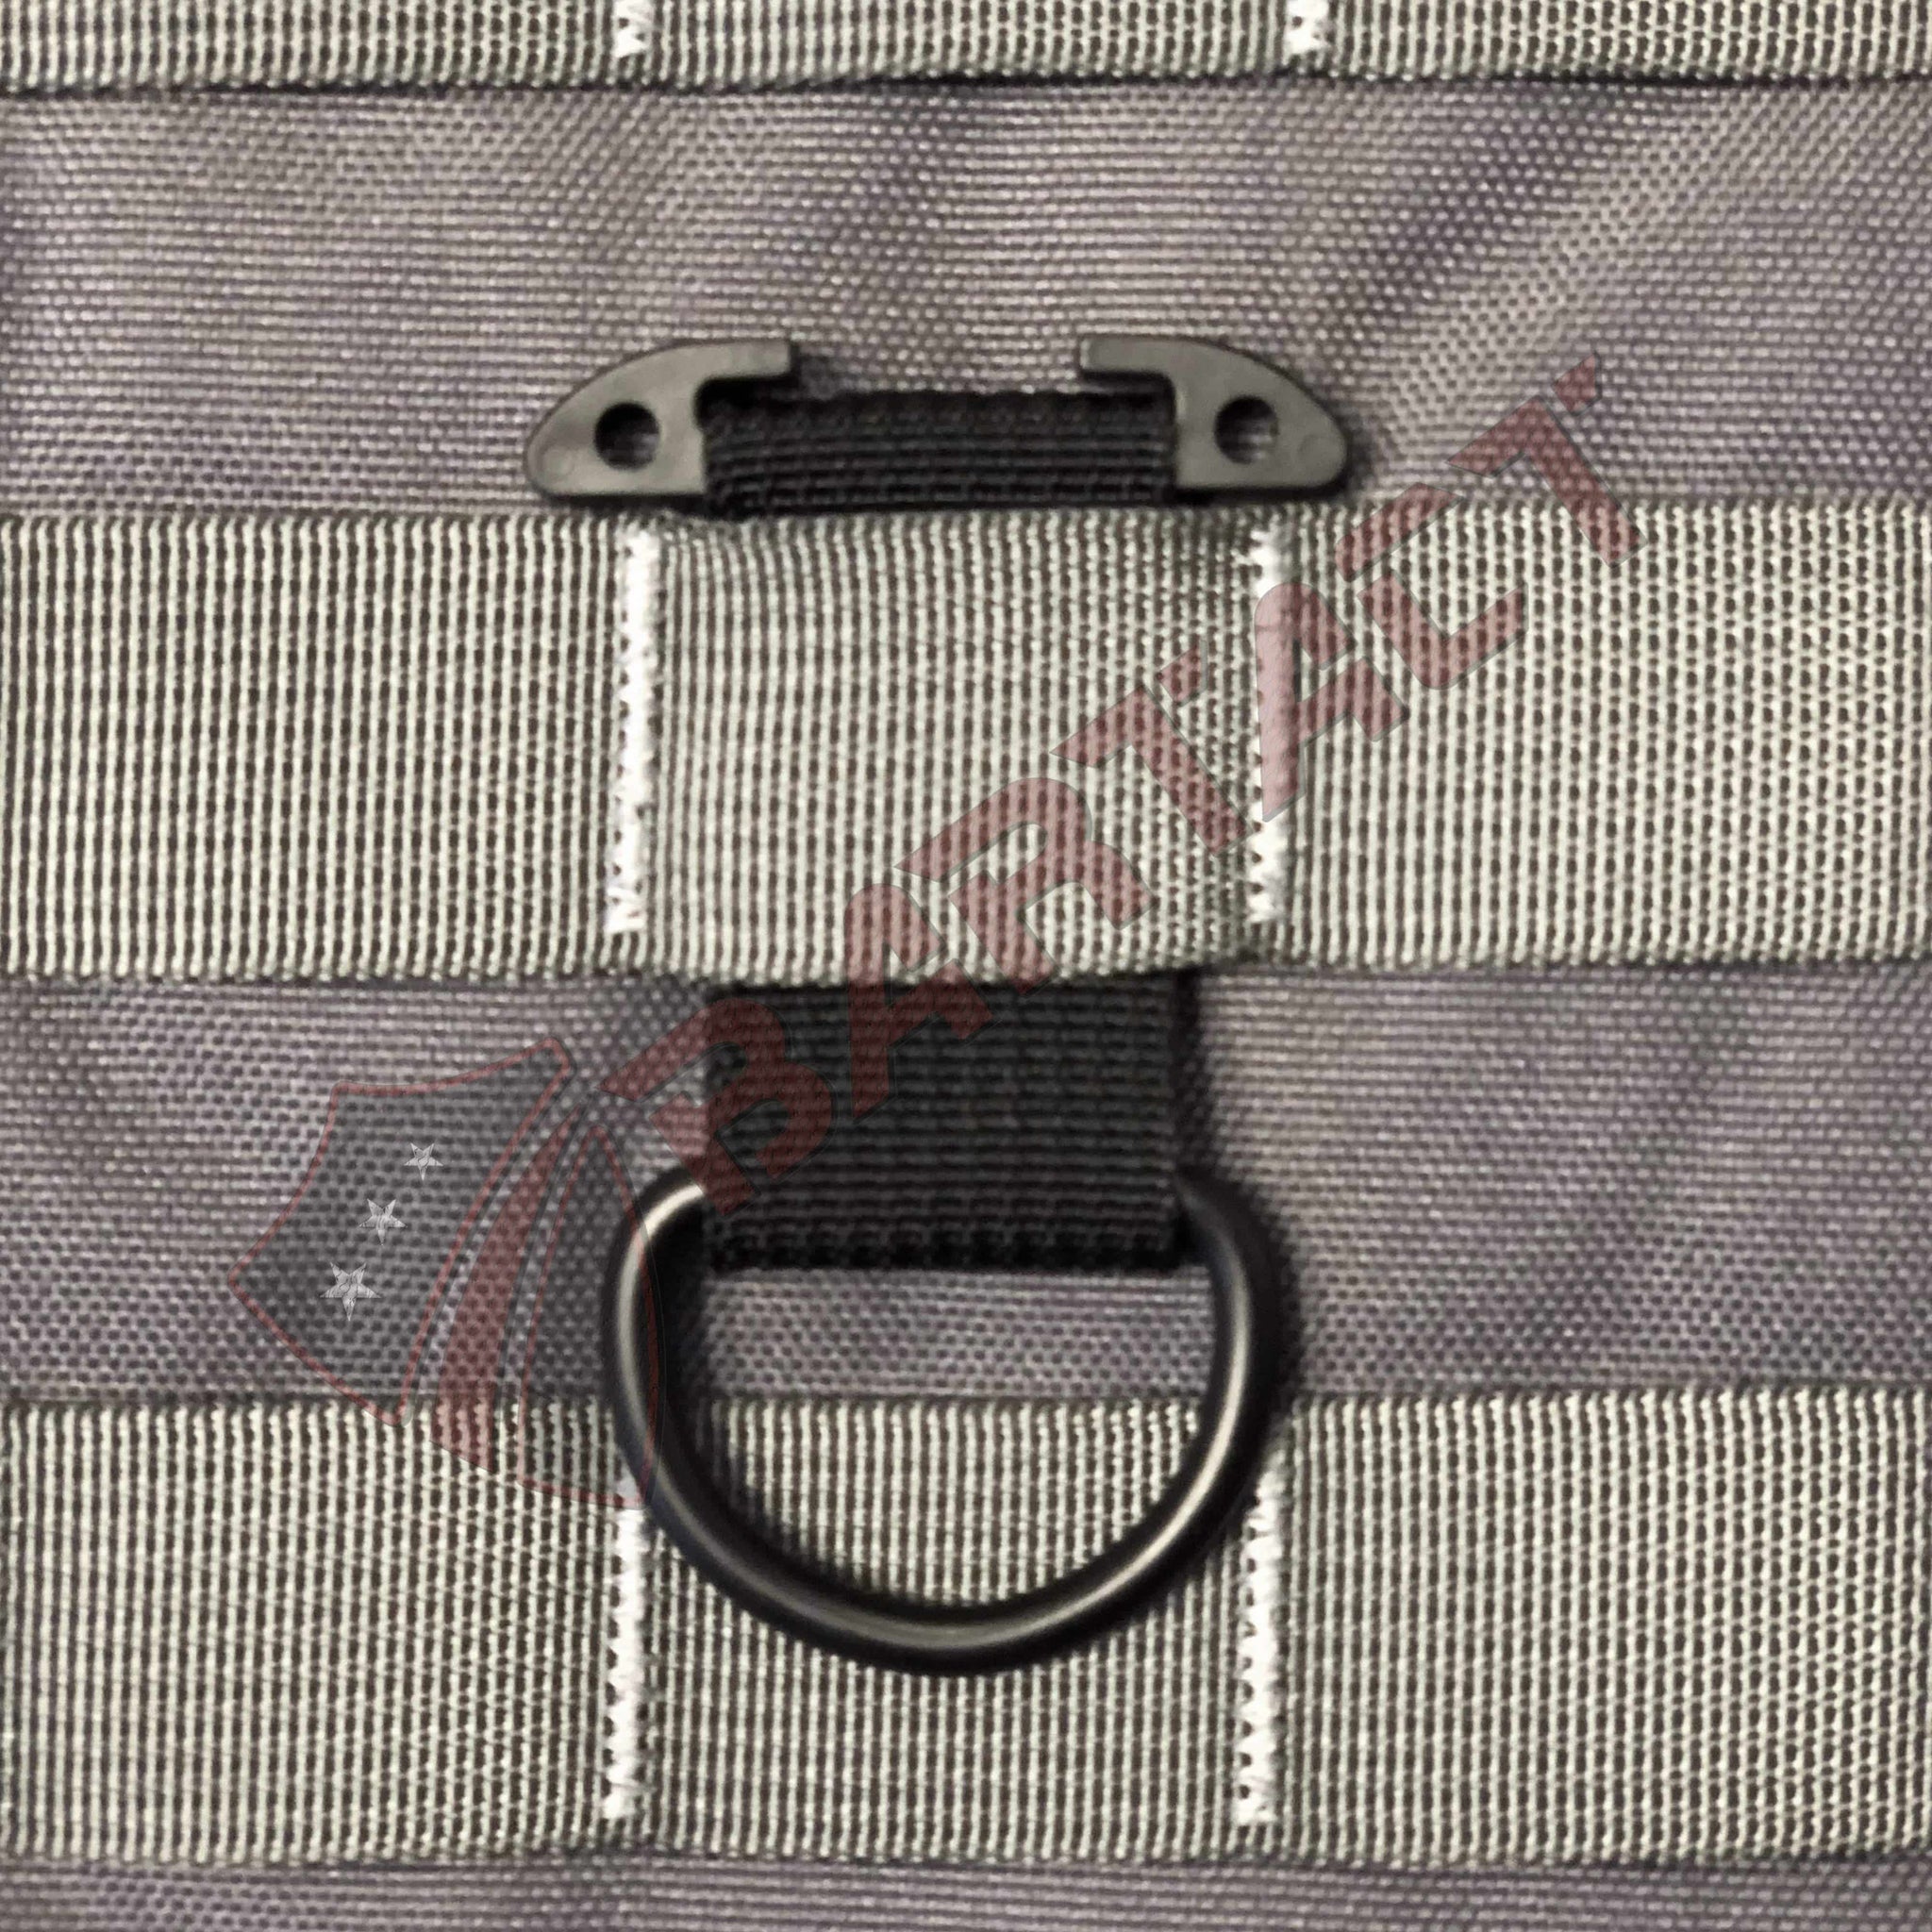 MOLLE Attachments by Bartact - PALS/MOLLE Acetal Heavy Duty D-Ring